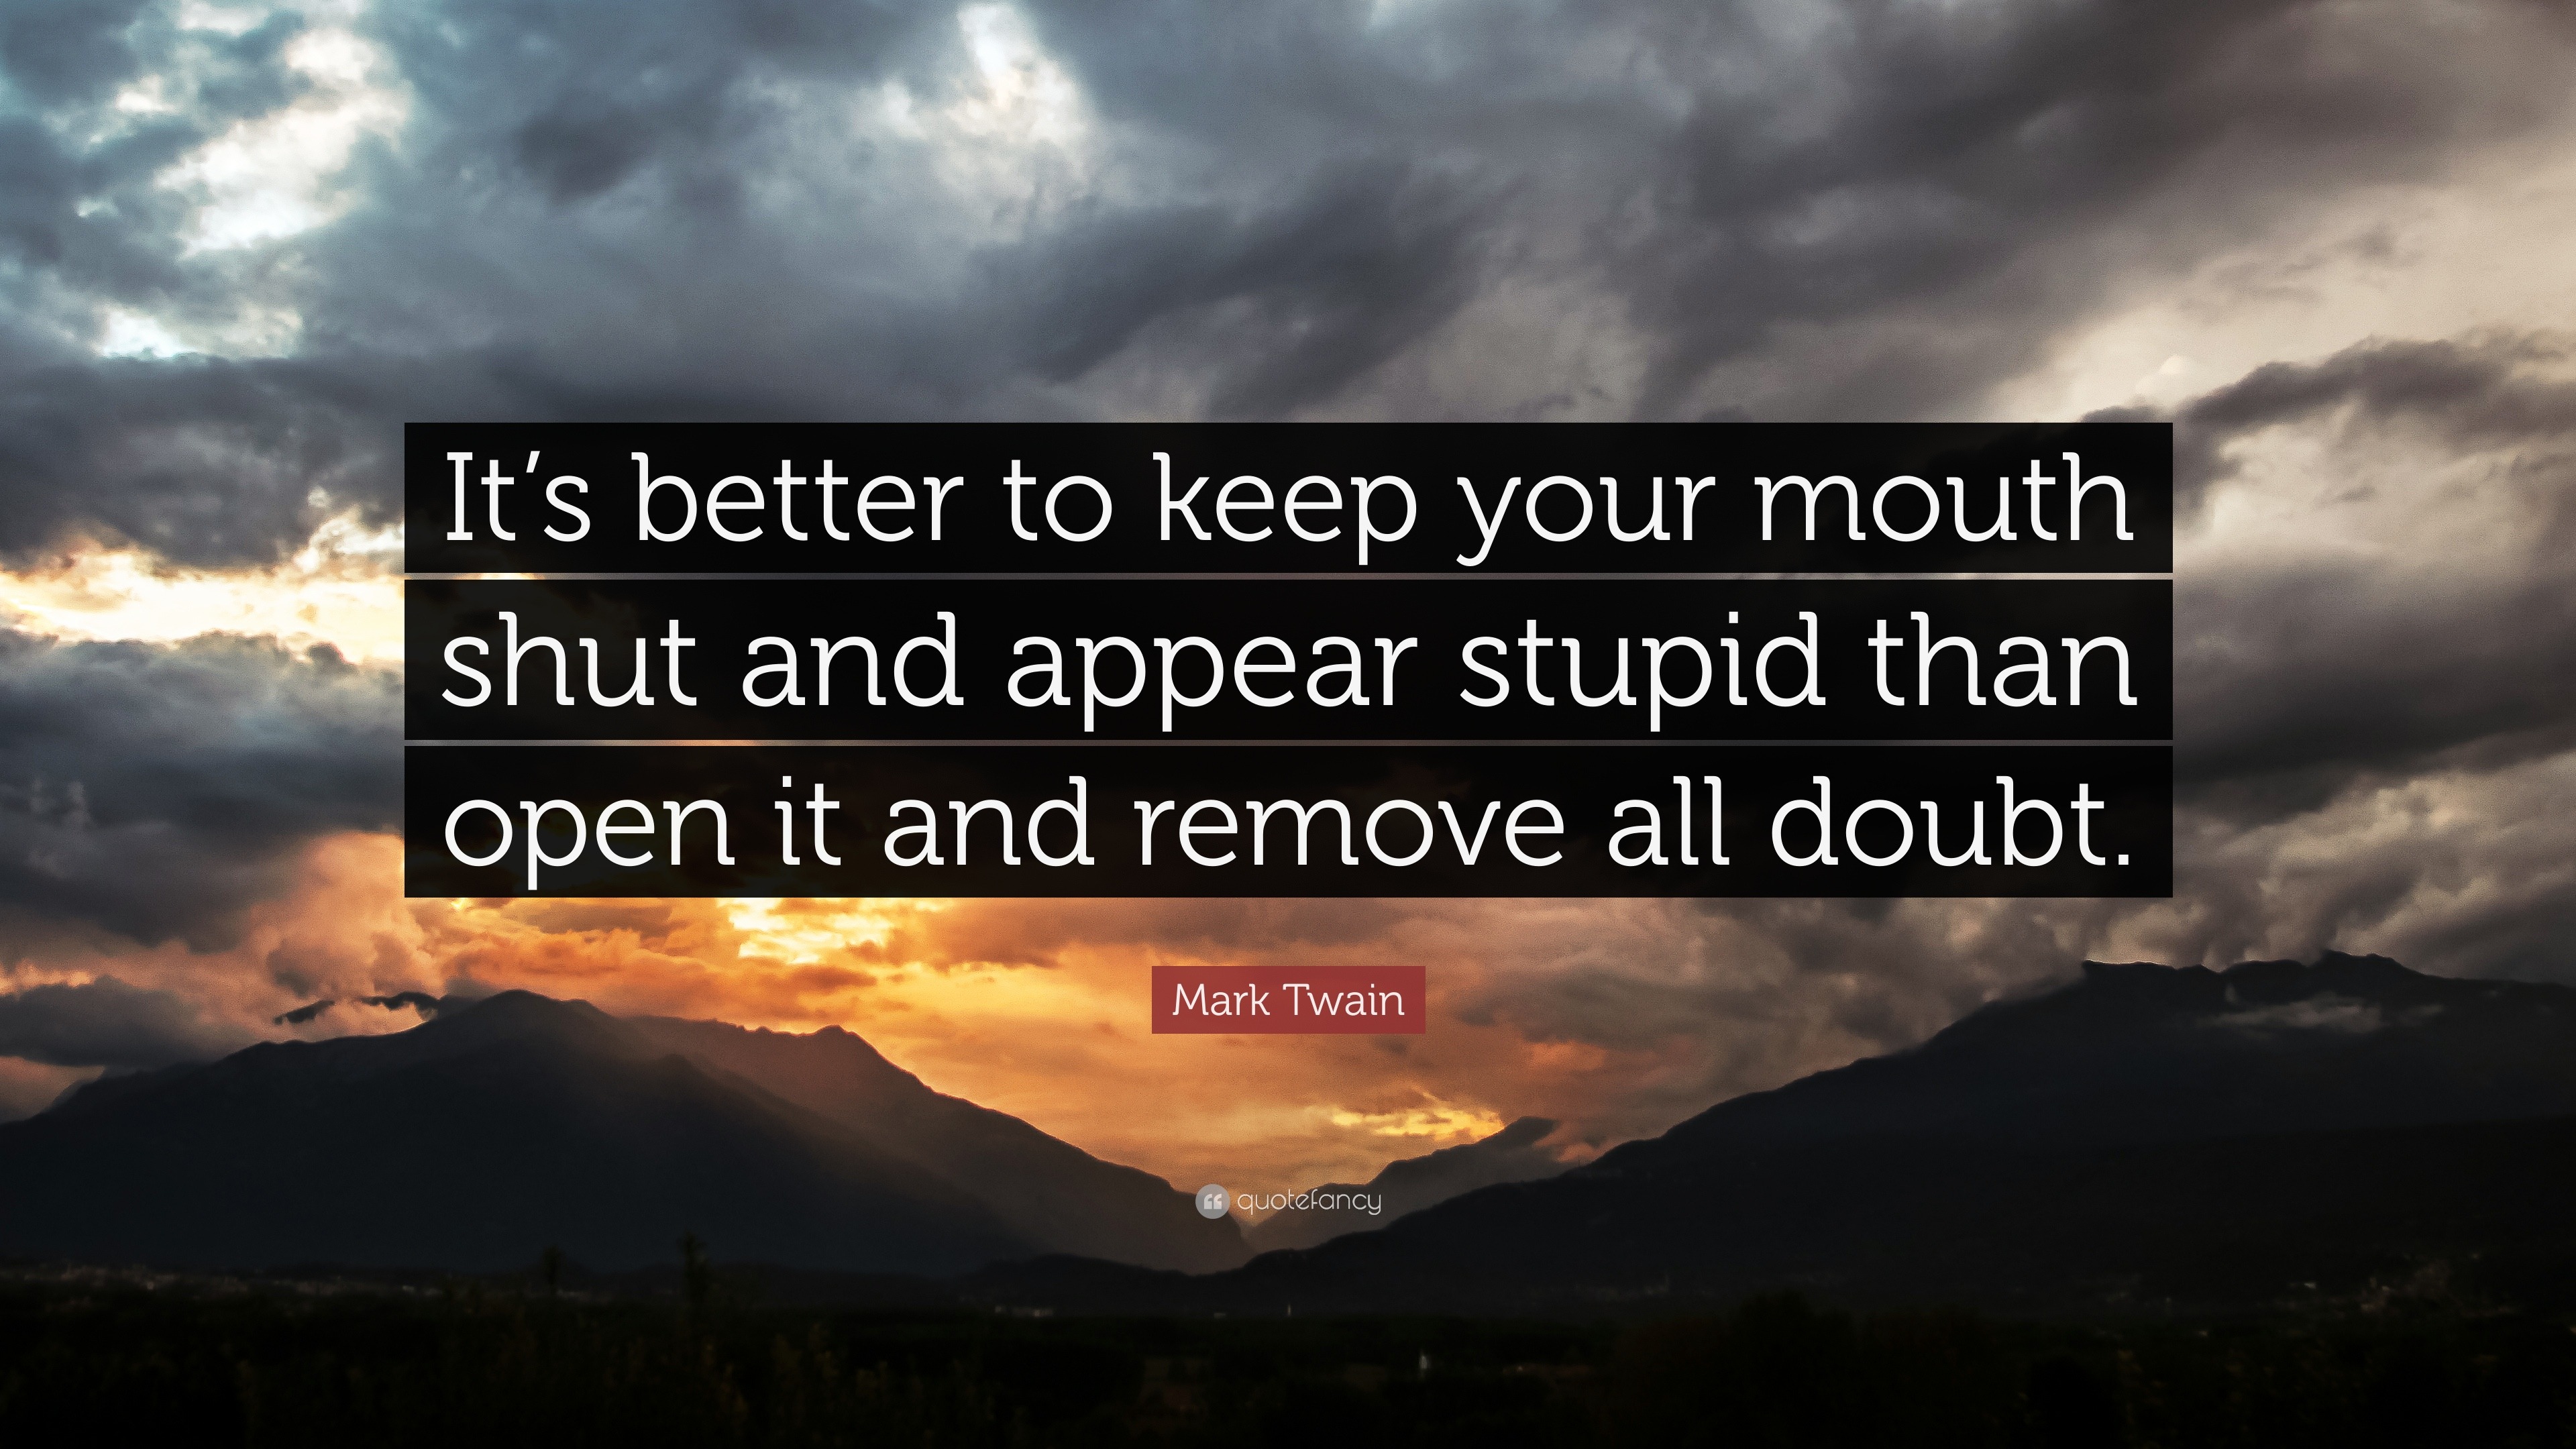 Mark Twain Quote “its Better To Keep Your Mouth Shut And Appear Stupid Than Open It And Remove